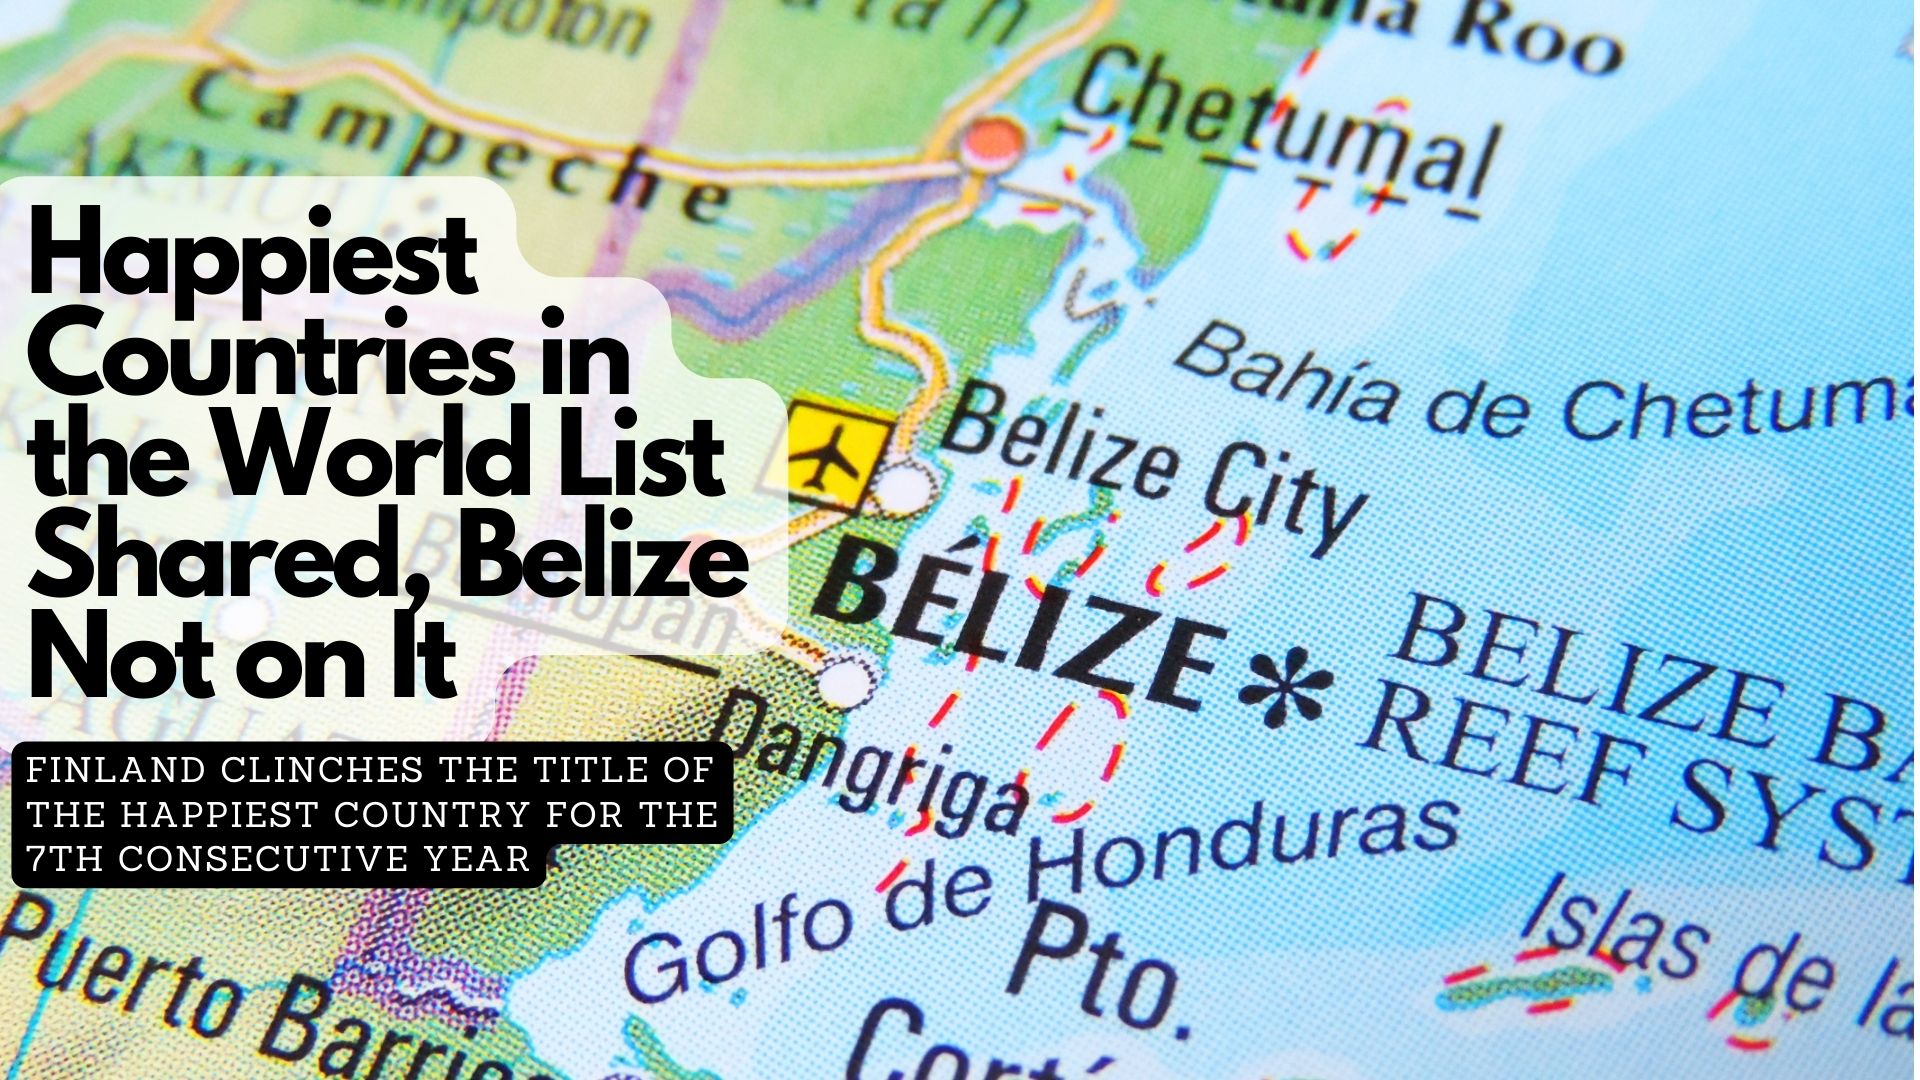 Happiest Countries in the World List Shared, Belize Not on It